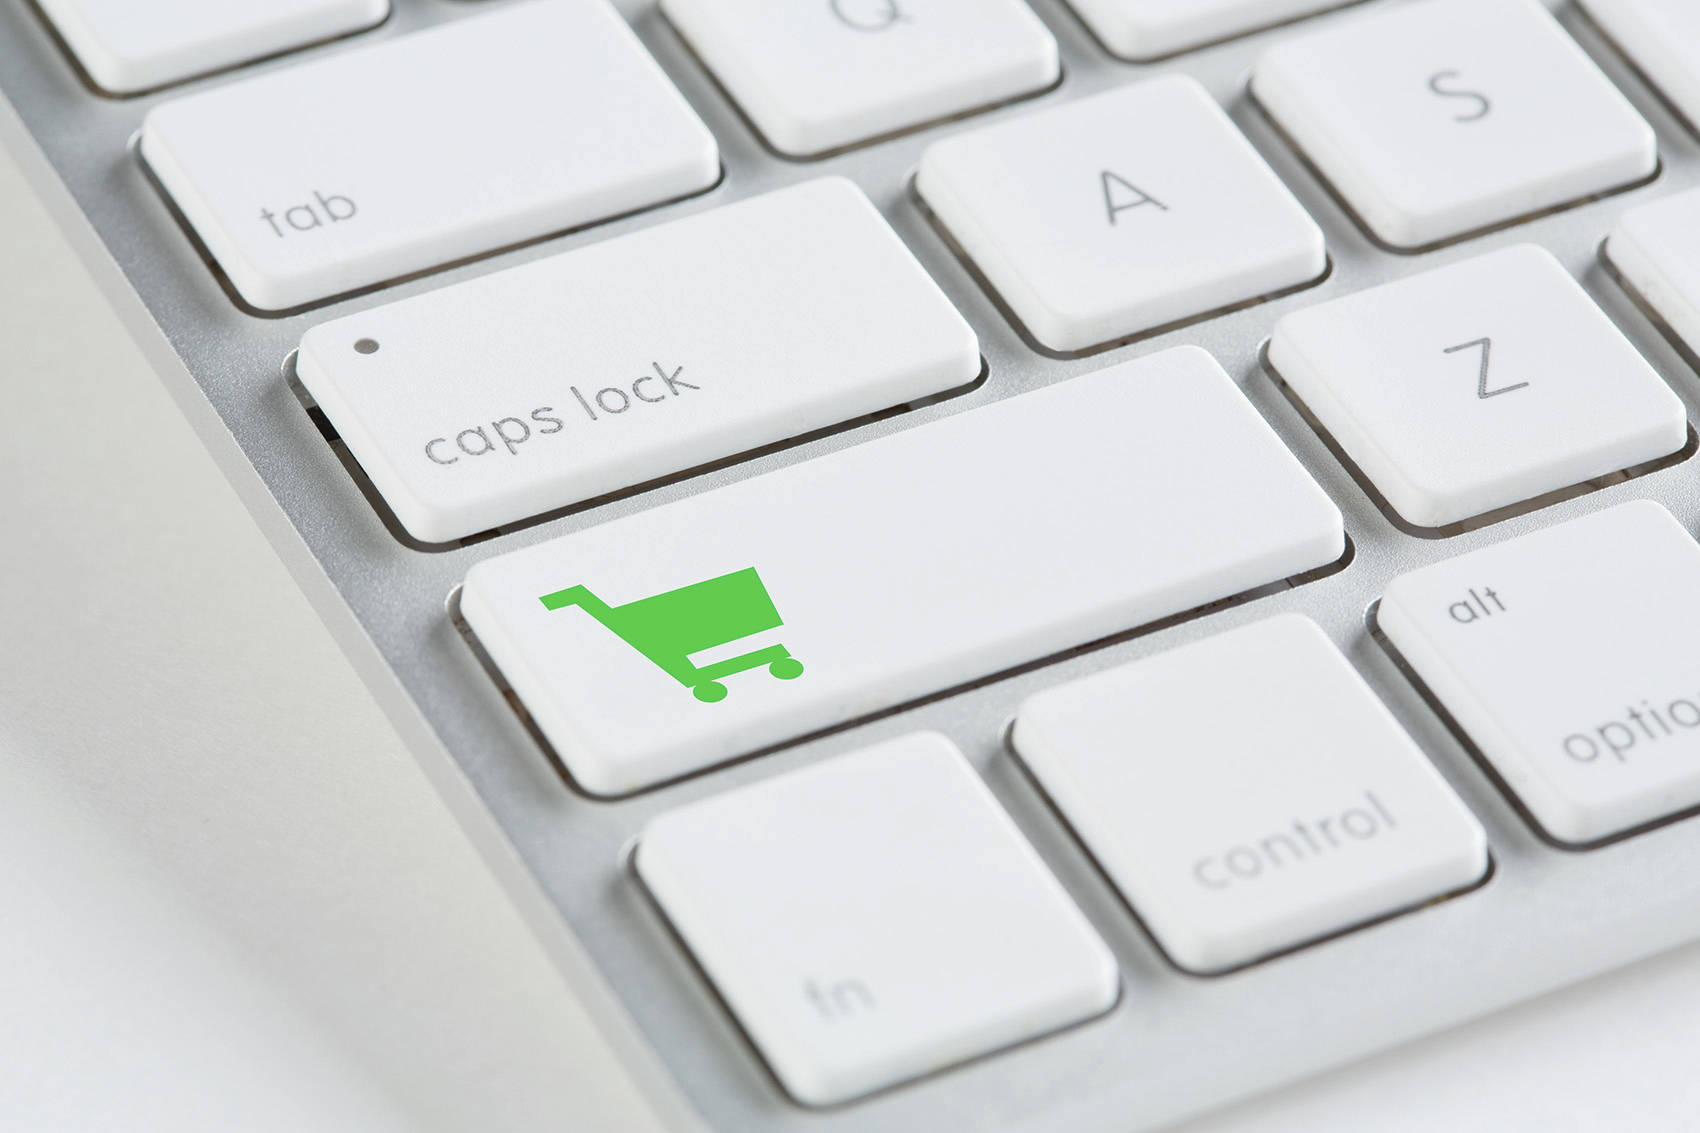 Borough works toward collecting sales tax on online purchases